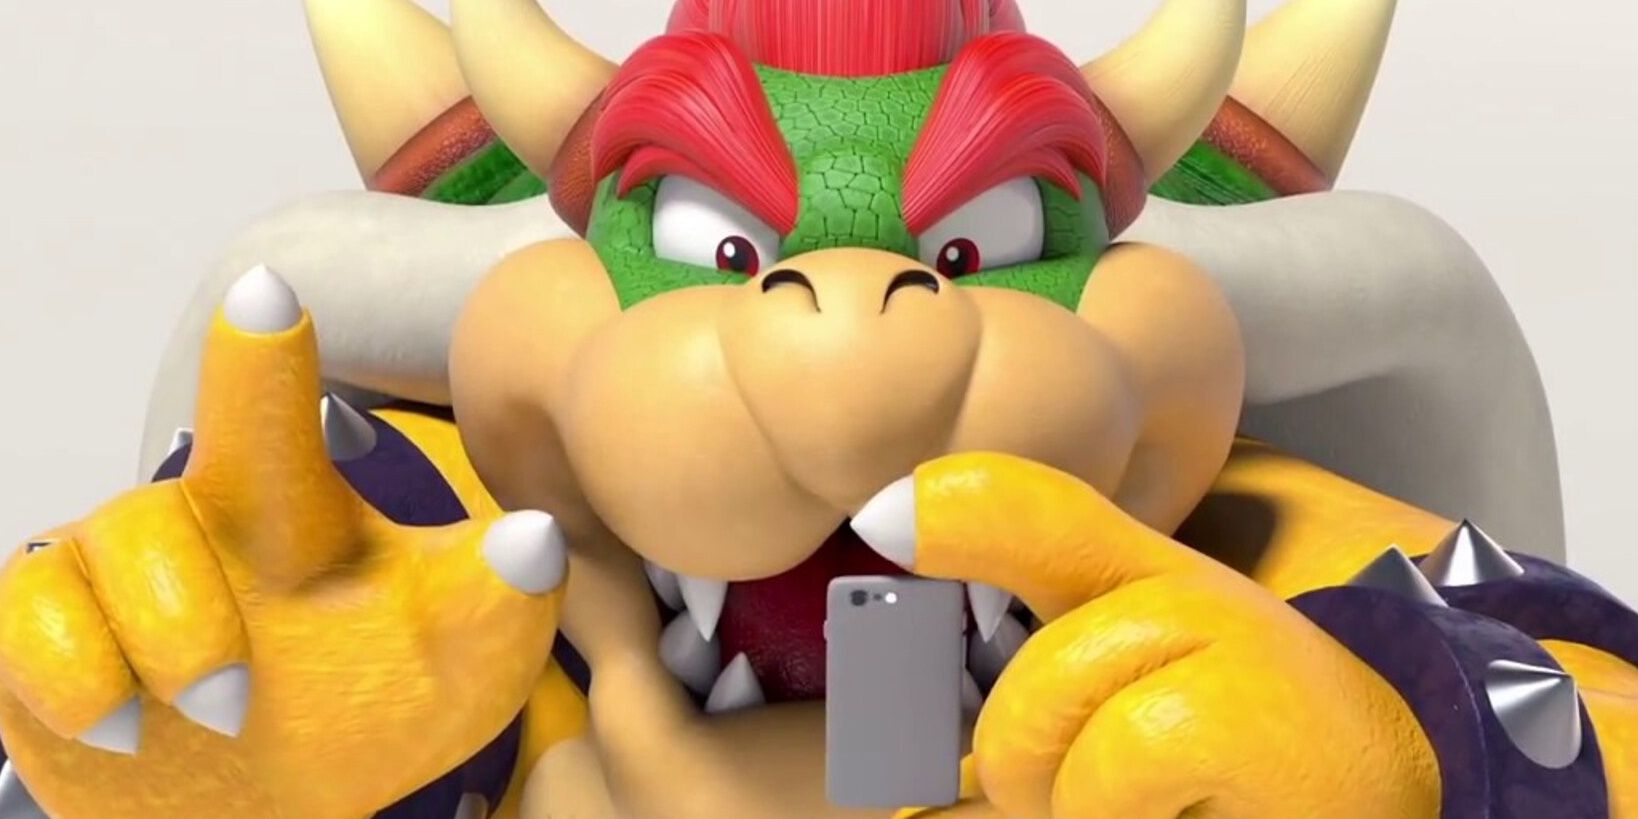 Bowser from Super Mario with a phone